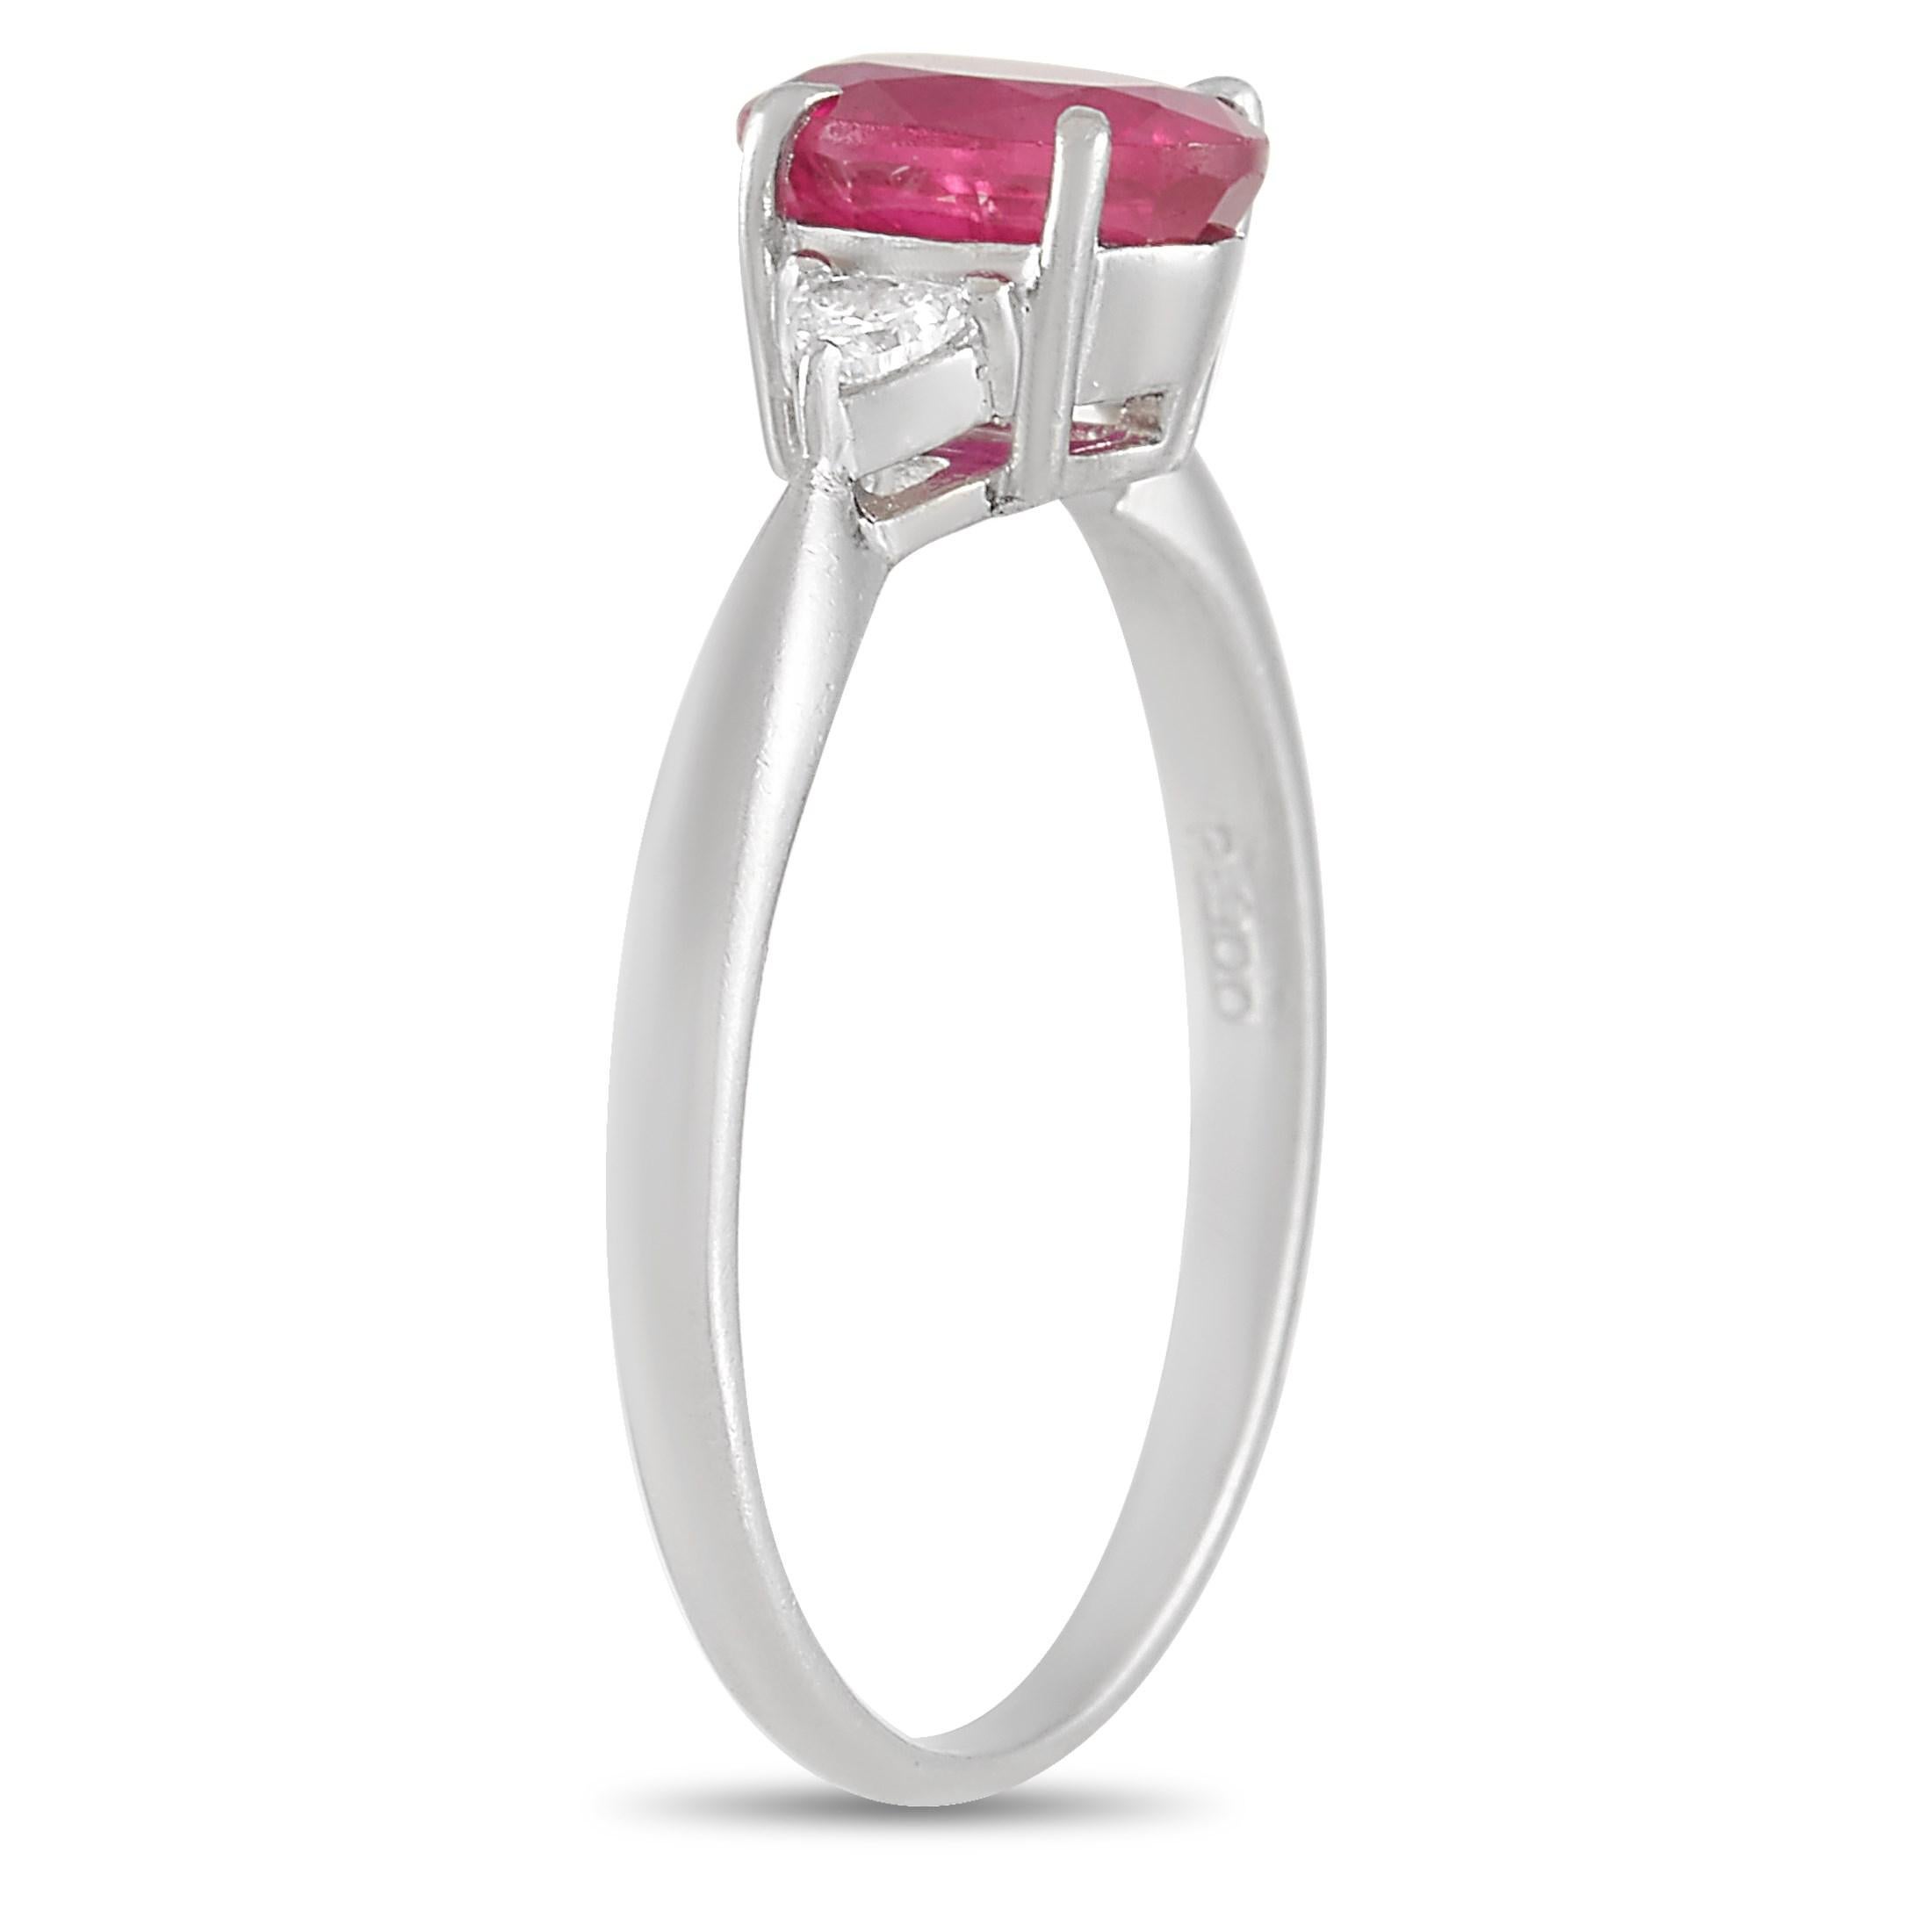 This pretty LB Exclusive Platinum 0.09 ct Diamond 1.20 ct Ruby Ring is pure class. The band is made with platinum and set with an oval cut 1.20 carat ruby held in place by four prongs and flanked on either side by a round cut diamond totaling 0.09